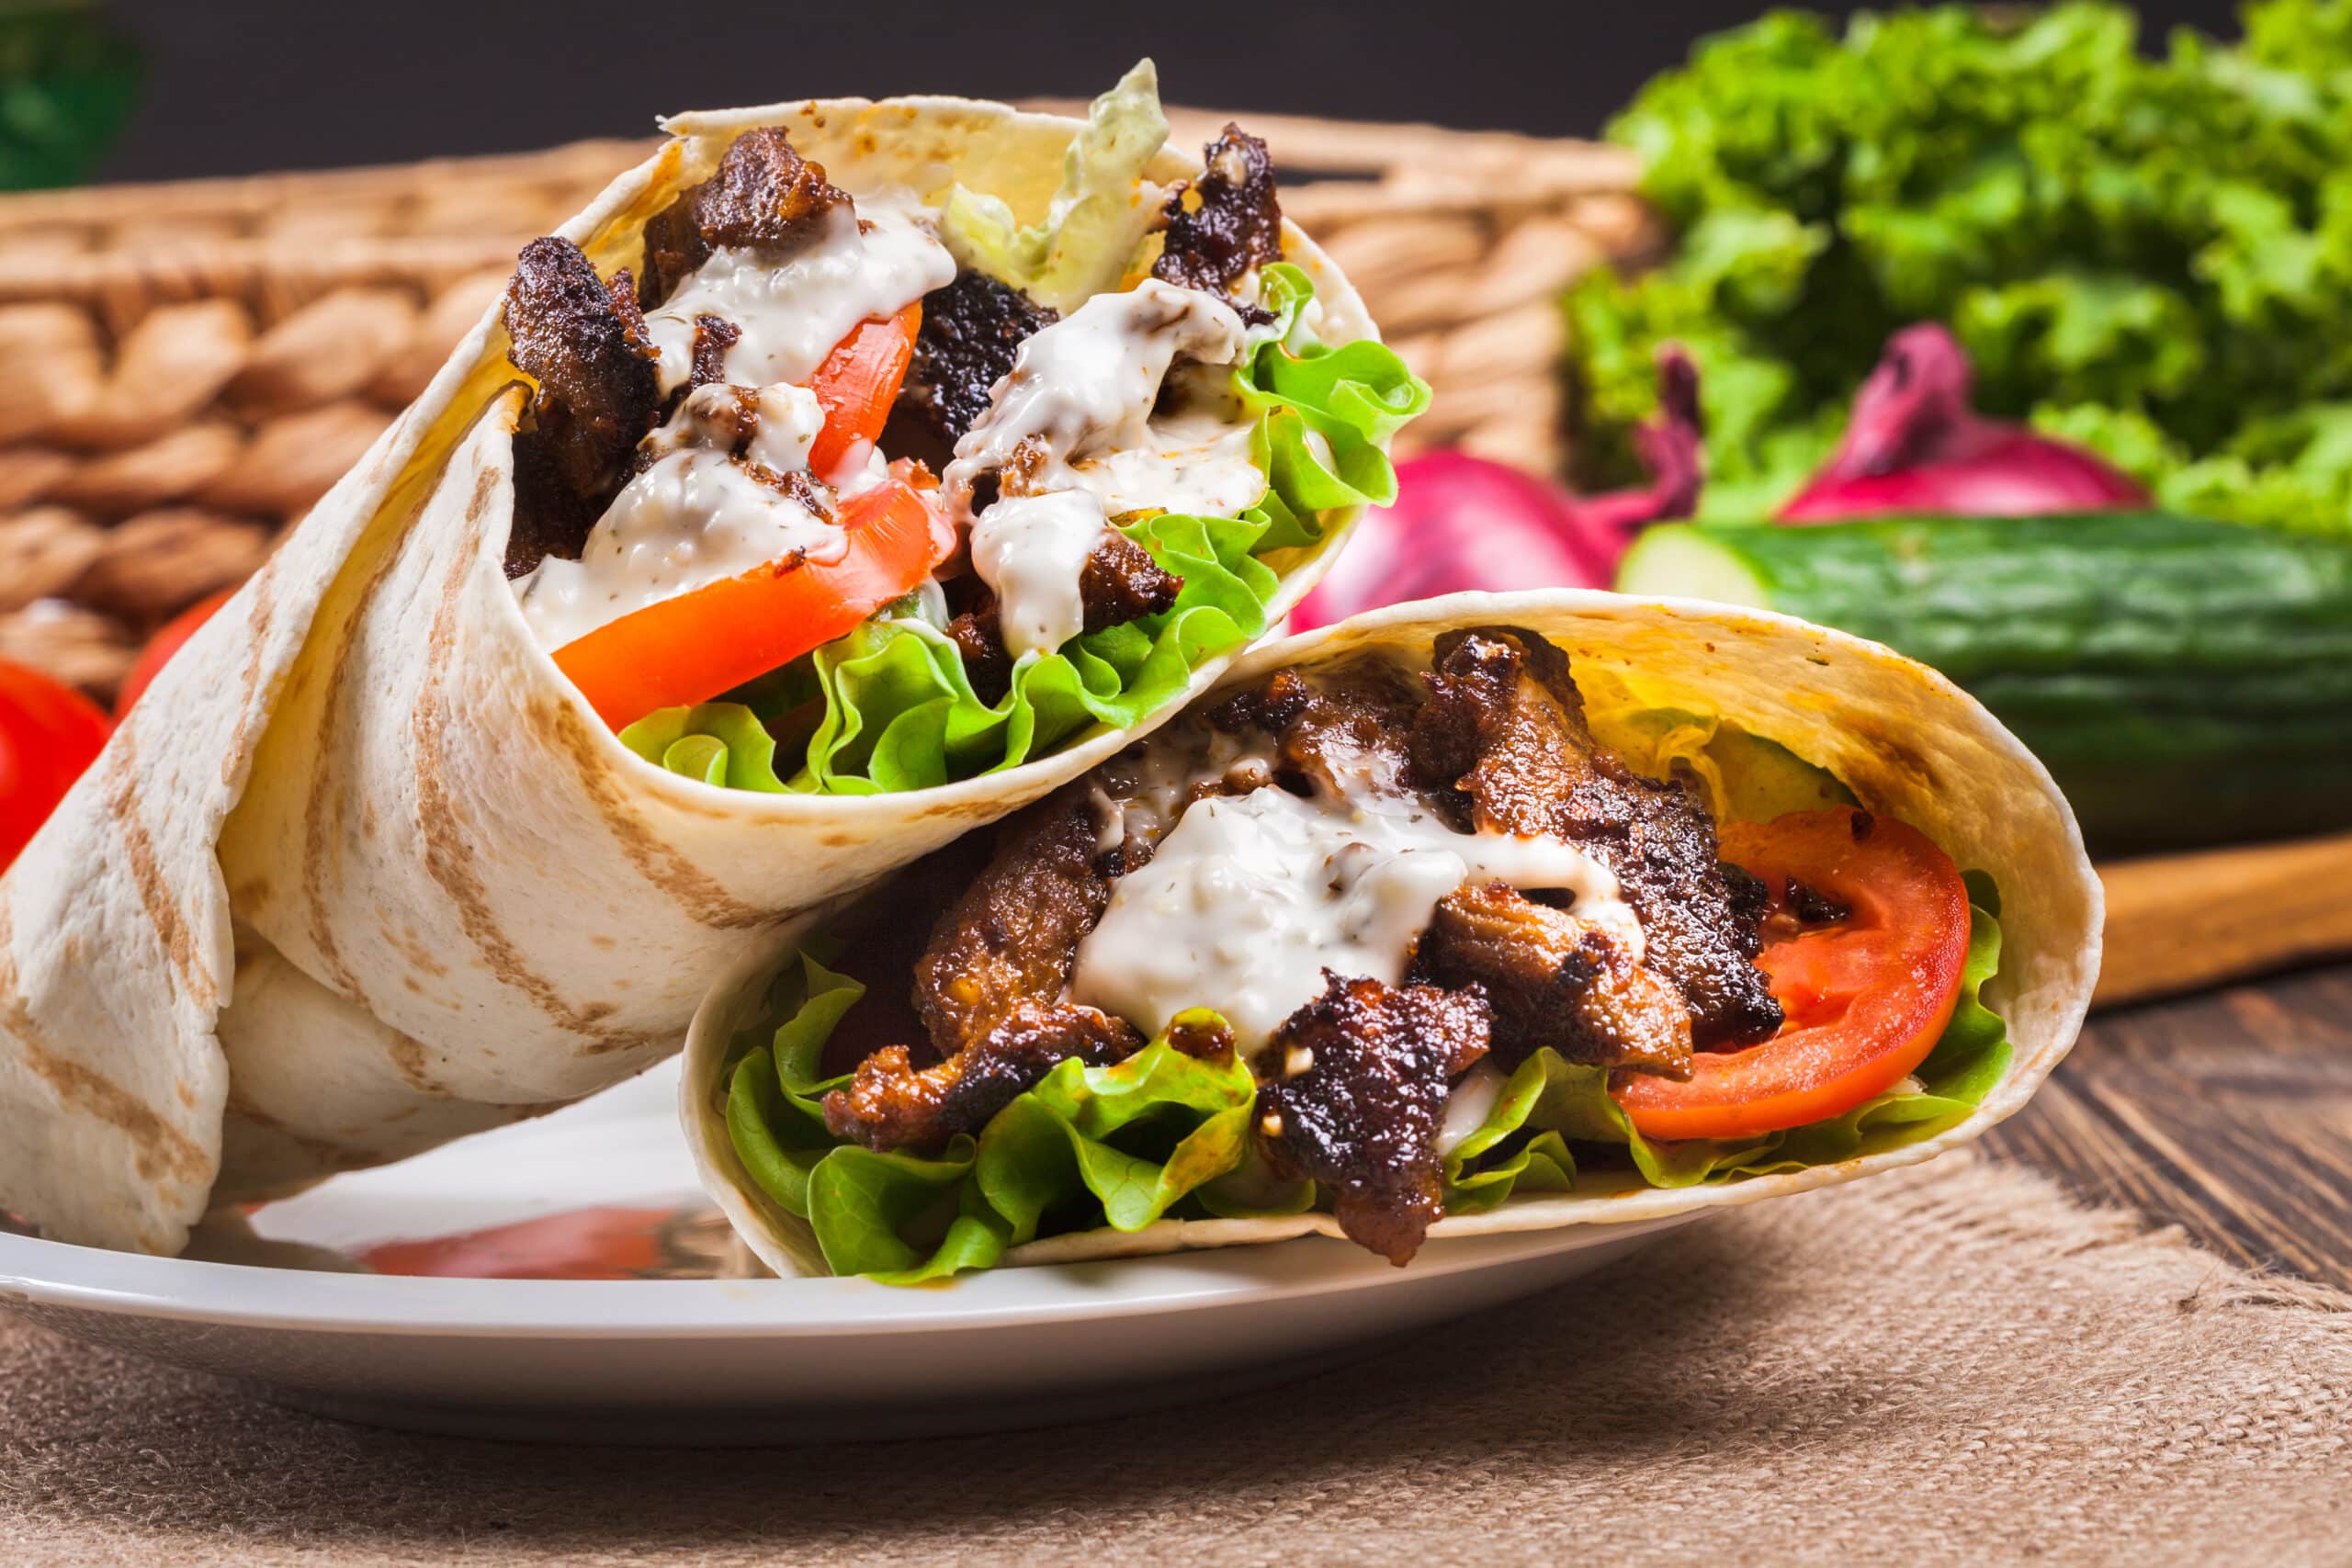 4 Reasons Why Wraps Are the Perfect Summer Takeout Meal